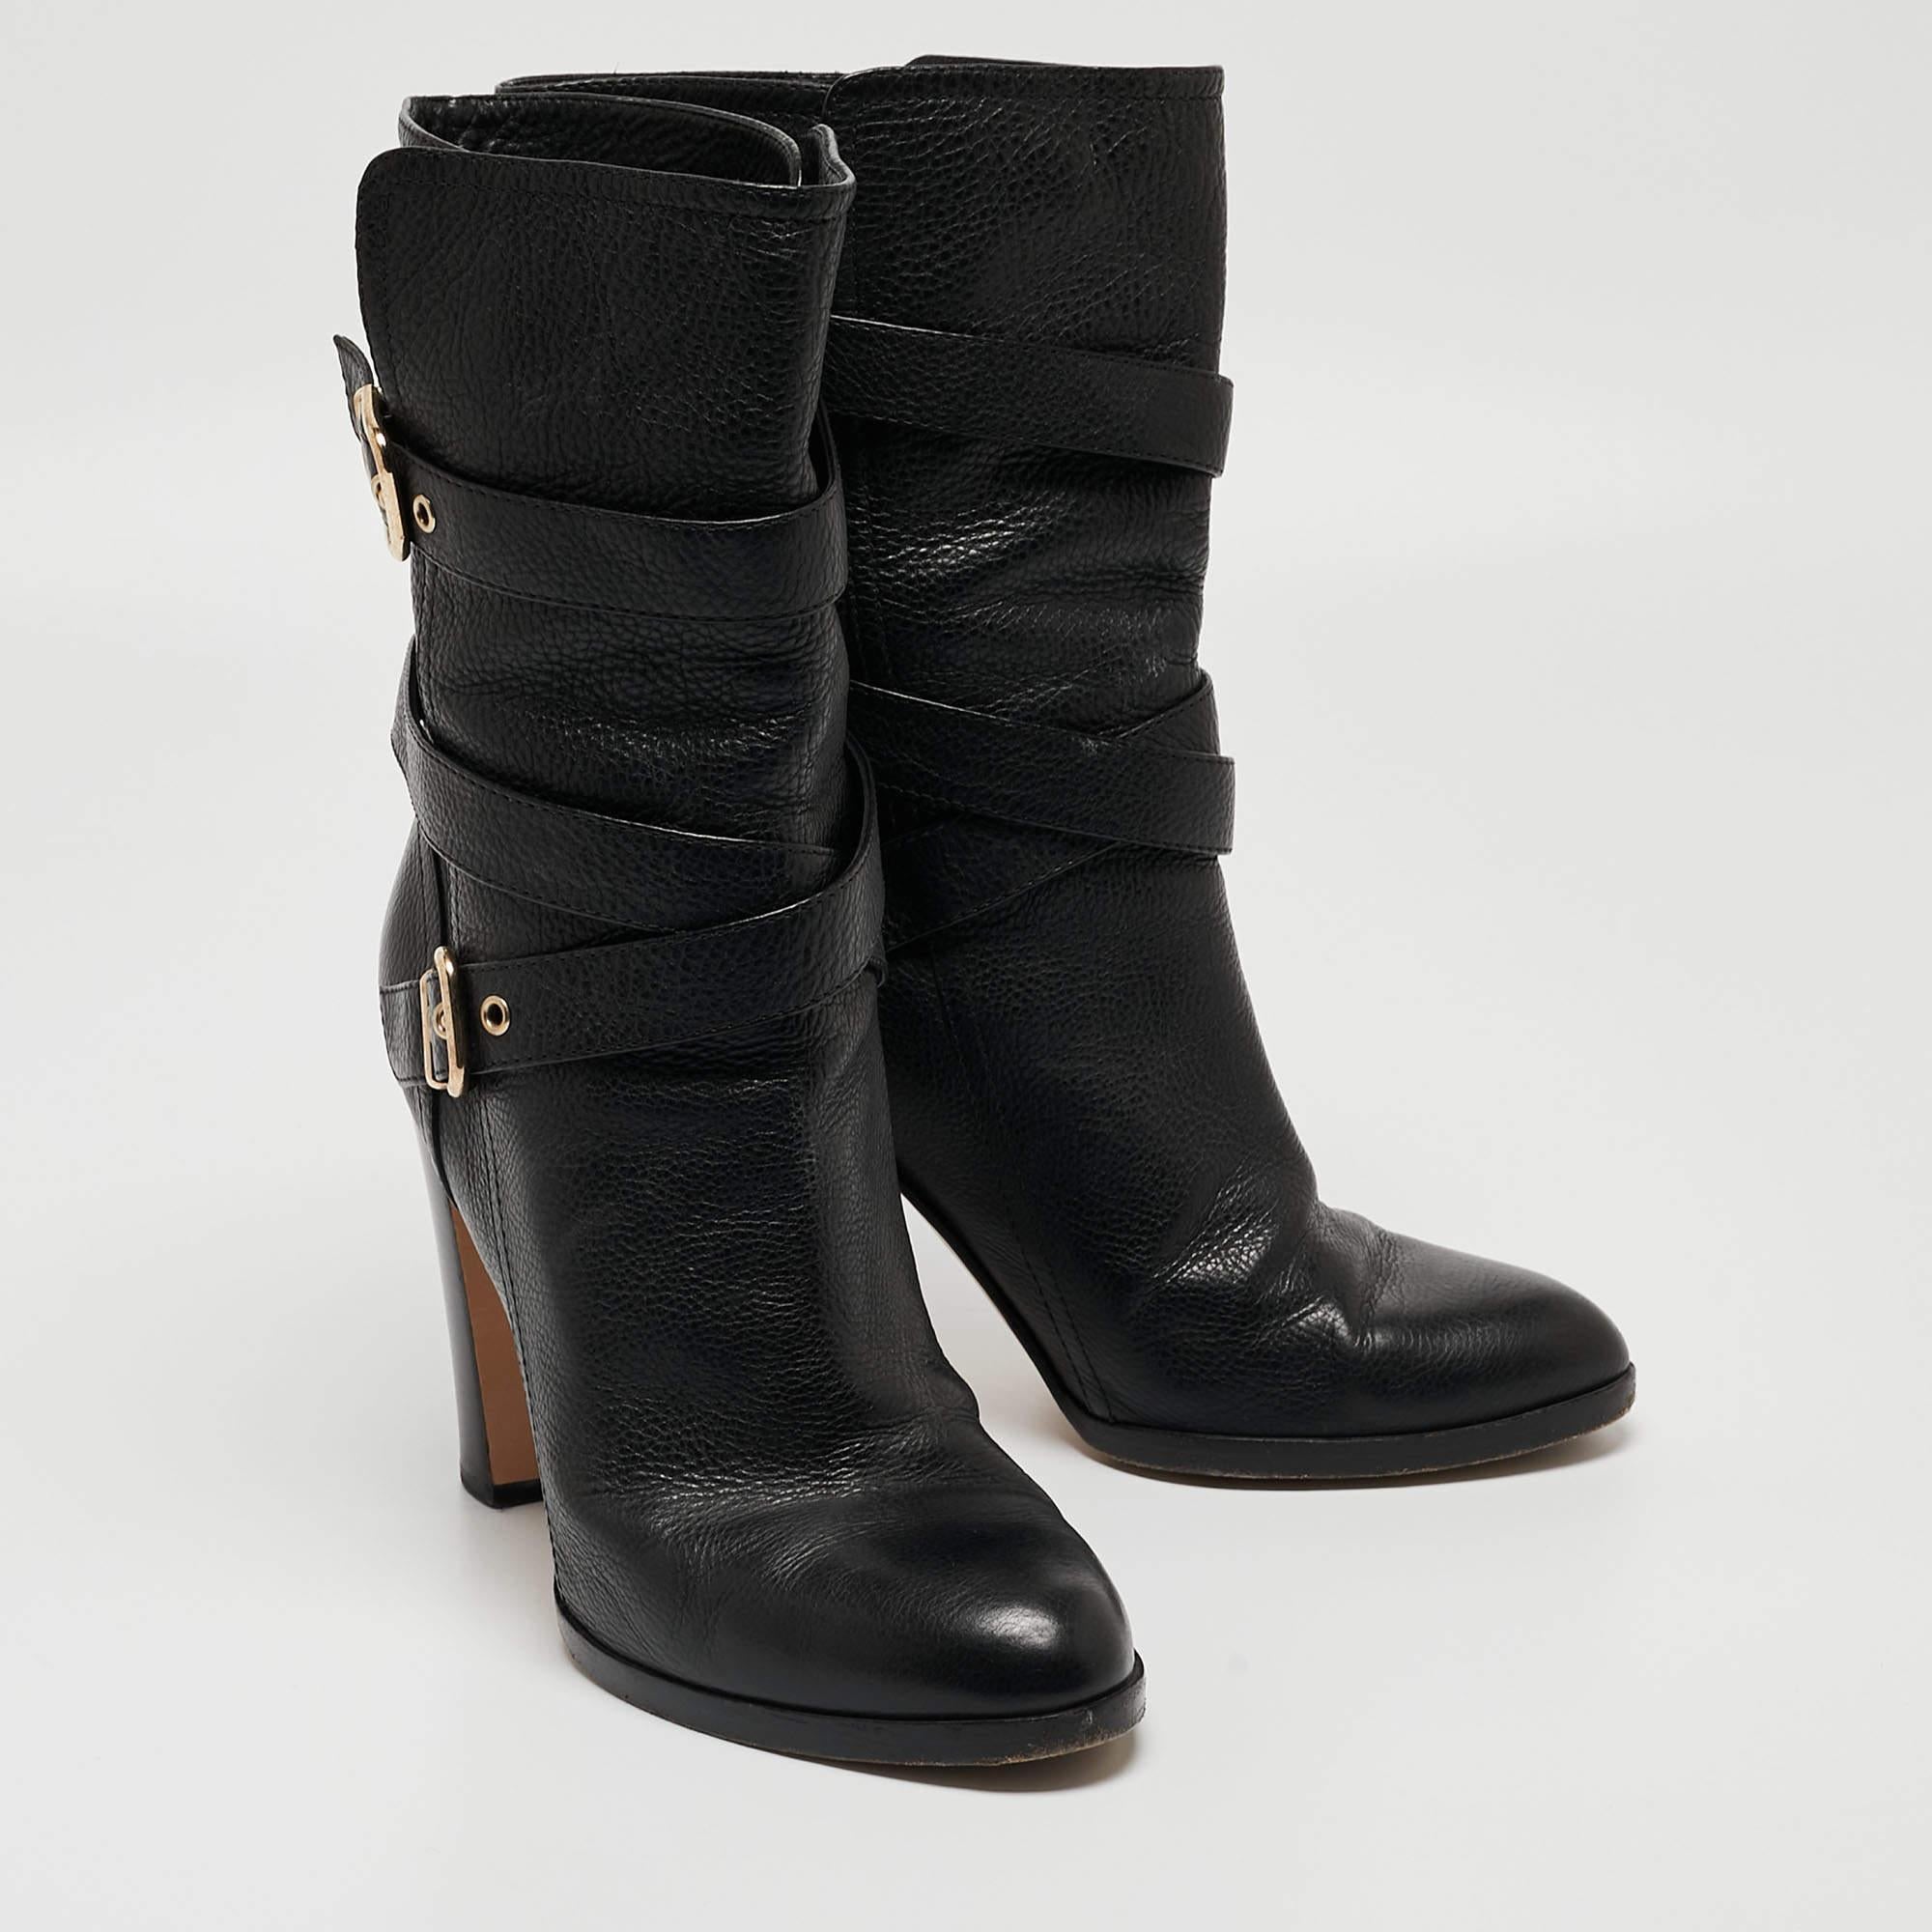 Gianvito Rossi Black Leather Buckle Detail Mid Calf Boots Size 40 For Sale 2